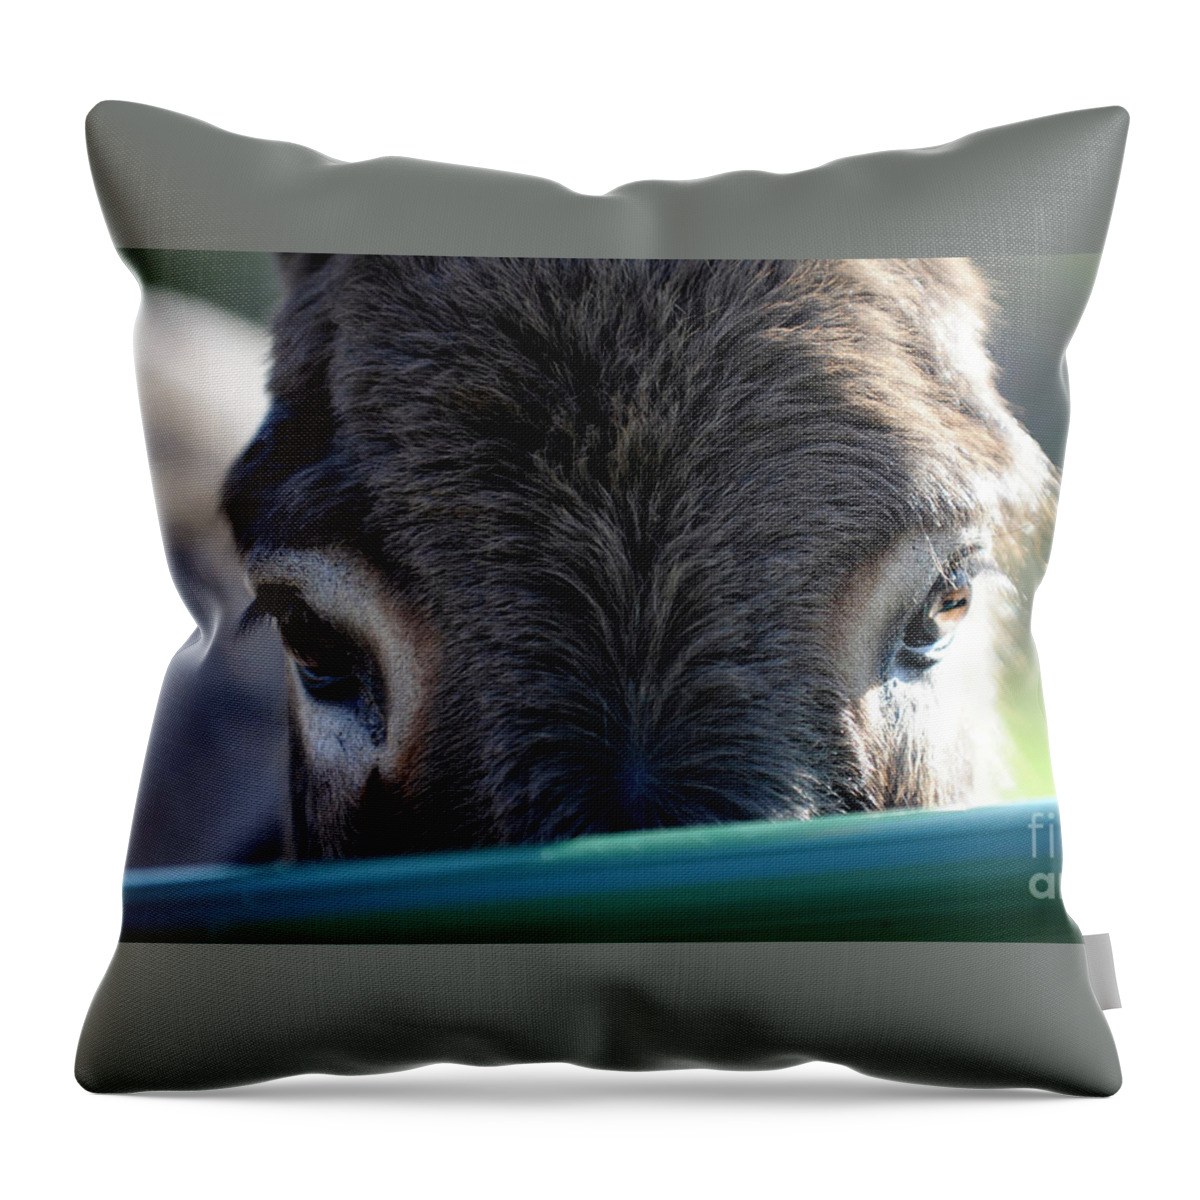 Rosemary Farm Sanctuary Throw Pillow featuring the photograph Nemo's Eyes by Carien Schippers